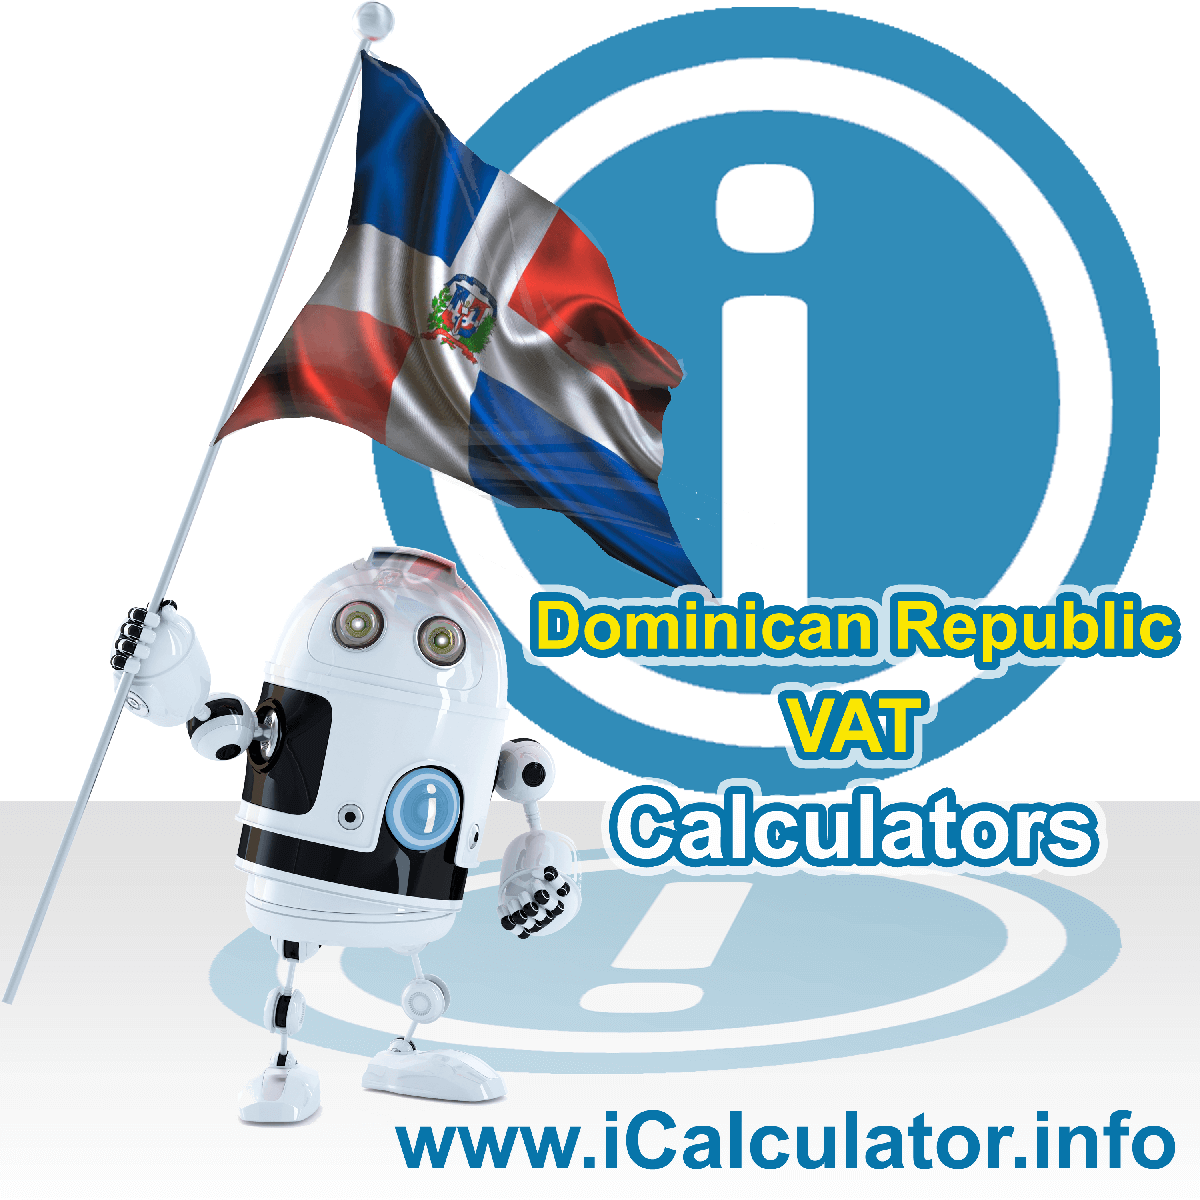 Dominican Republic VAT Calculator. This image shows the Dominican Republic flag and information relating to the VAT formula used for calculating Value Added Tax in Dominican Republic using the Dominican Republic VAT Calculator in 2022